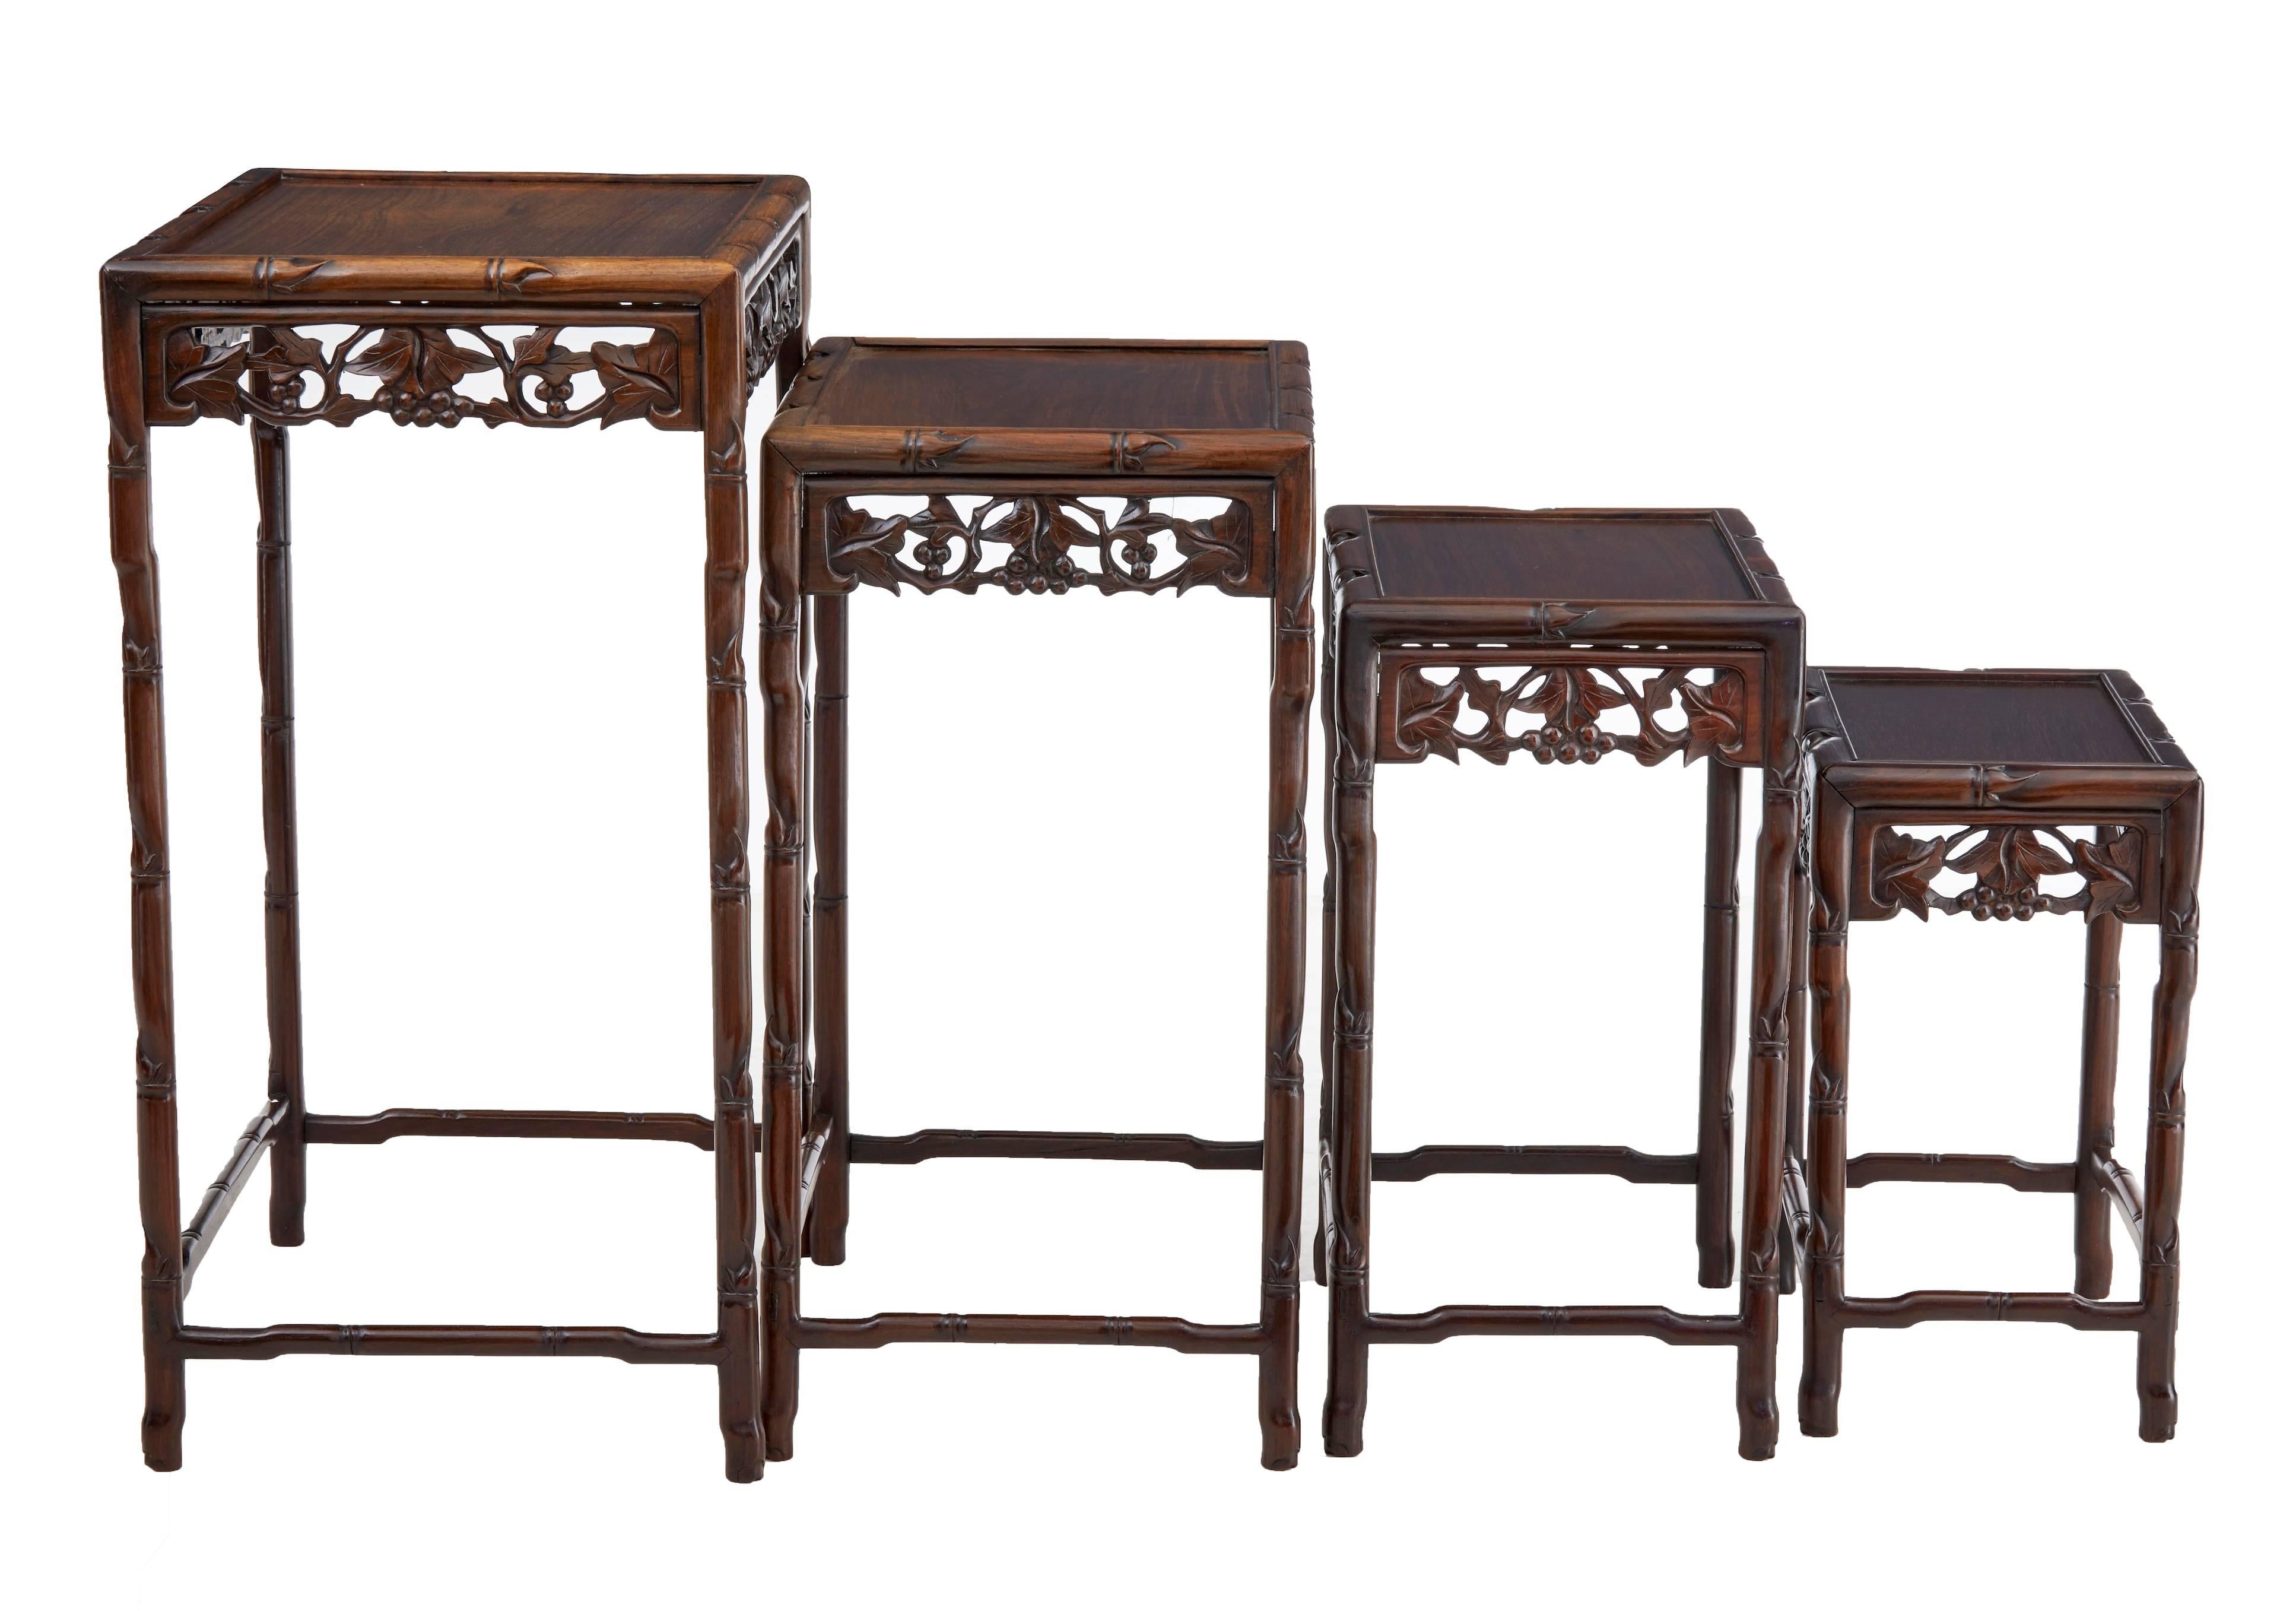 Good quality set of four nesting tables, circa 1900.
Rare to have such a good quality set of four.
Beautifully carved top edge, with applied pierced vine and grape carving between the legs.
Good color and quality timbers used.
Expected natural